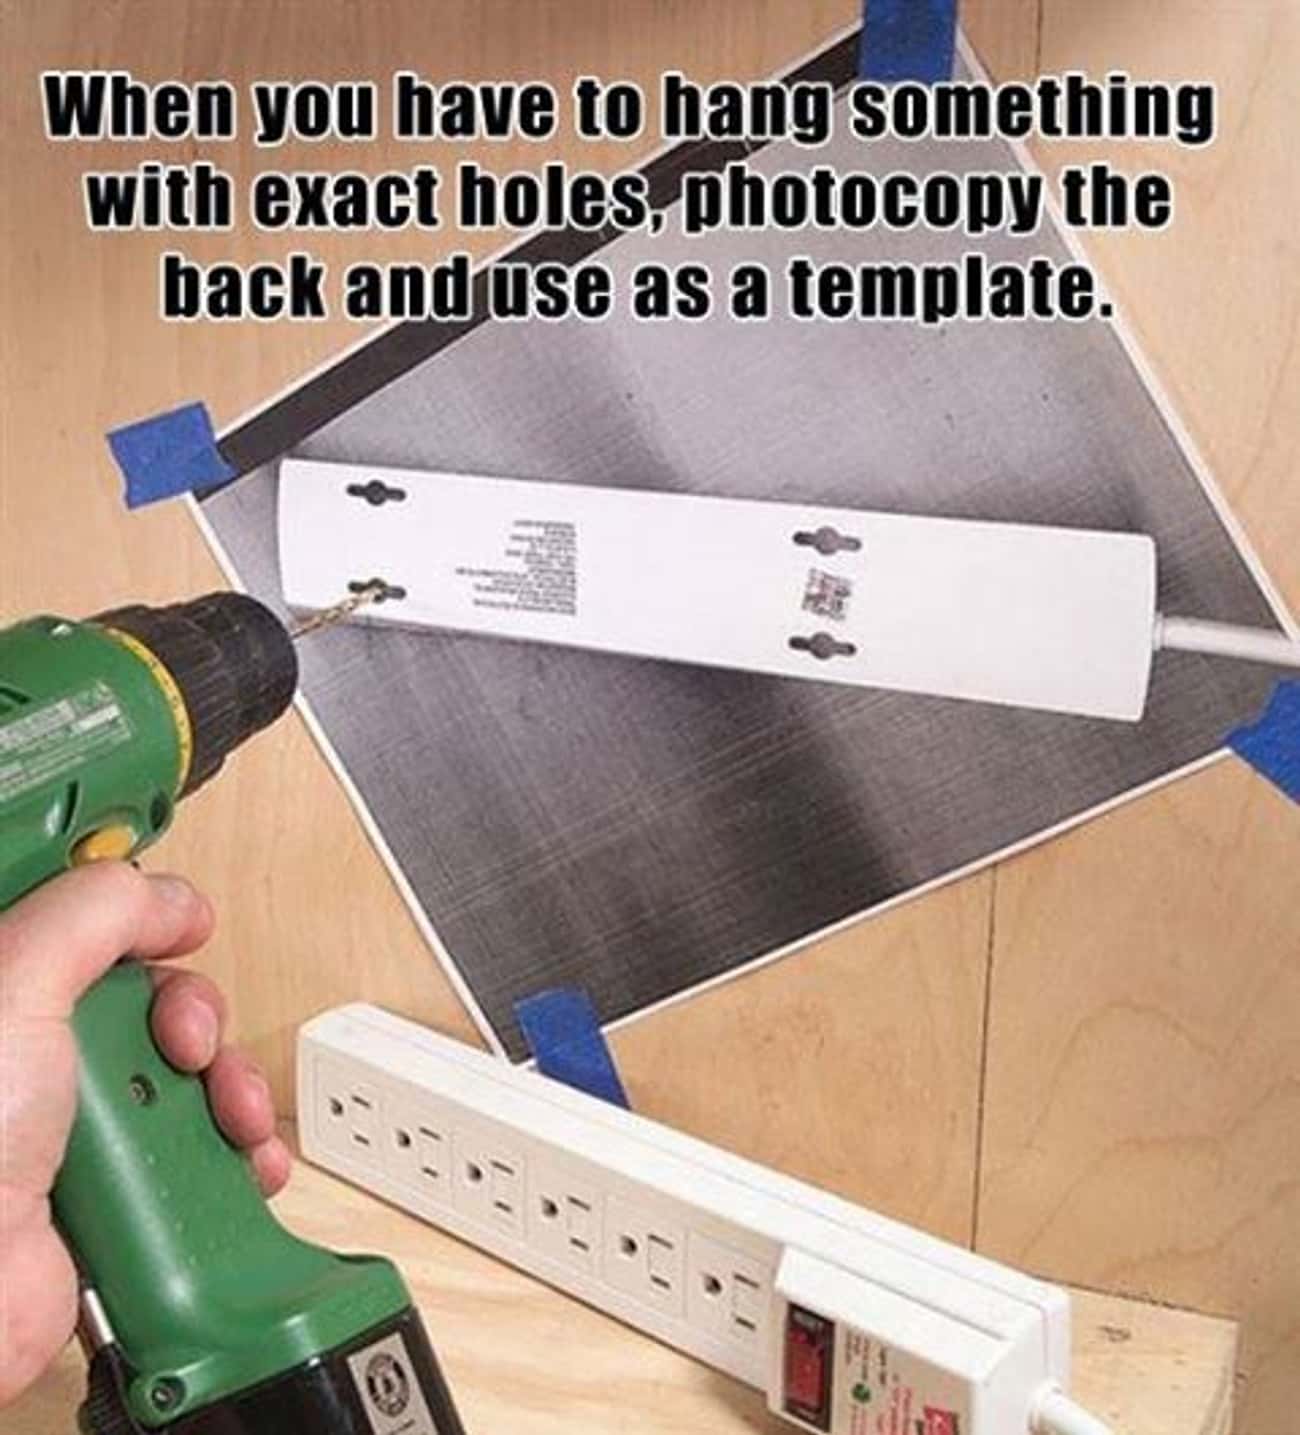 How To Hang Stuff With Specific Holes